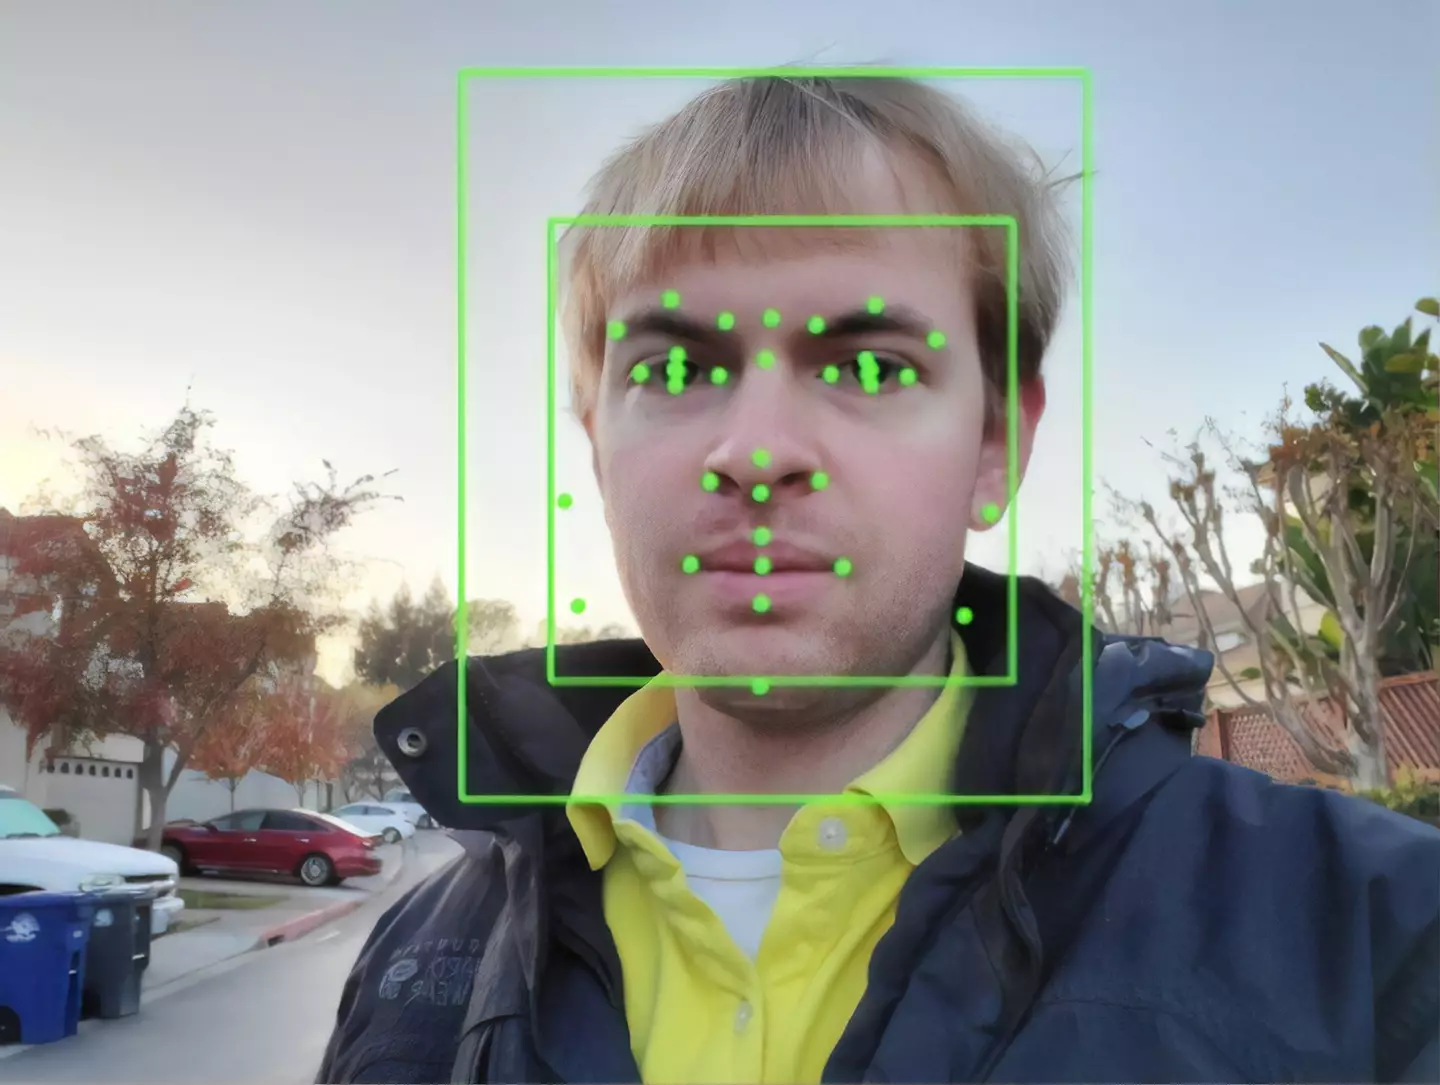 Facial recognition software can spot you and AI can find your other pictures.